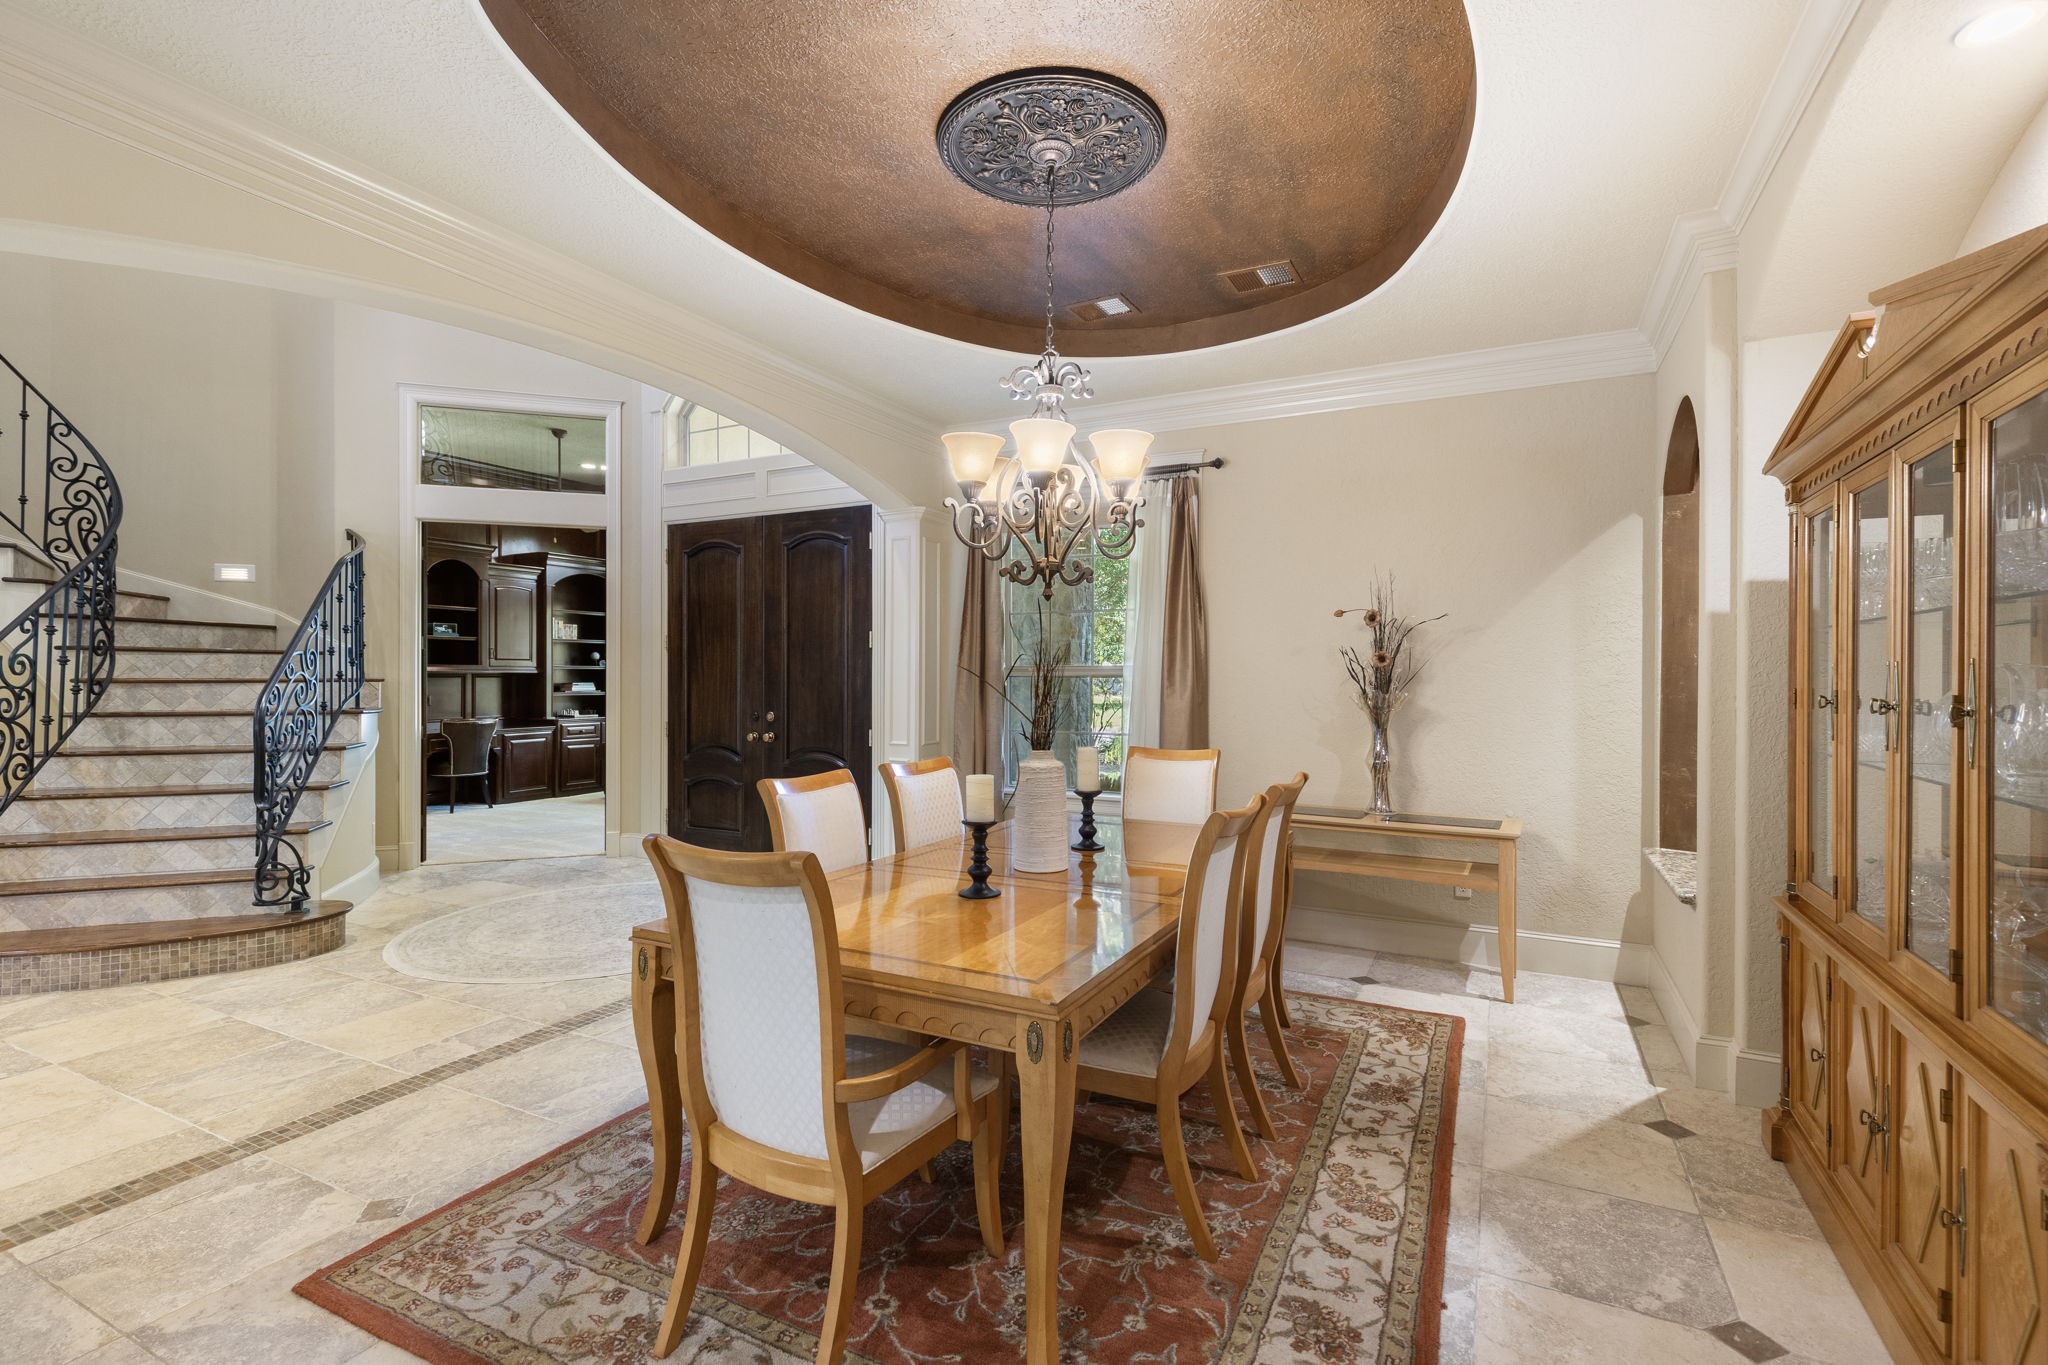 The elegant dining room offers a large space for entertaining with decorative niches, timeless tray ceiling and classic crown moulding.